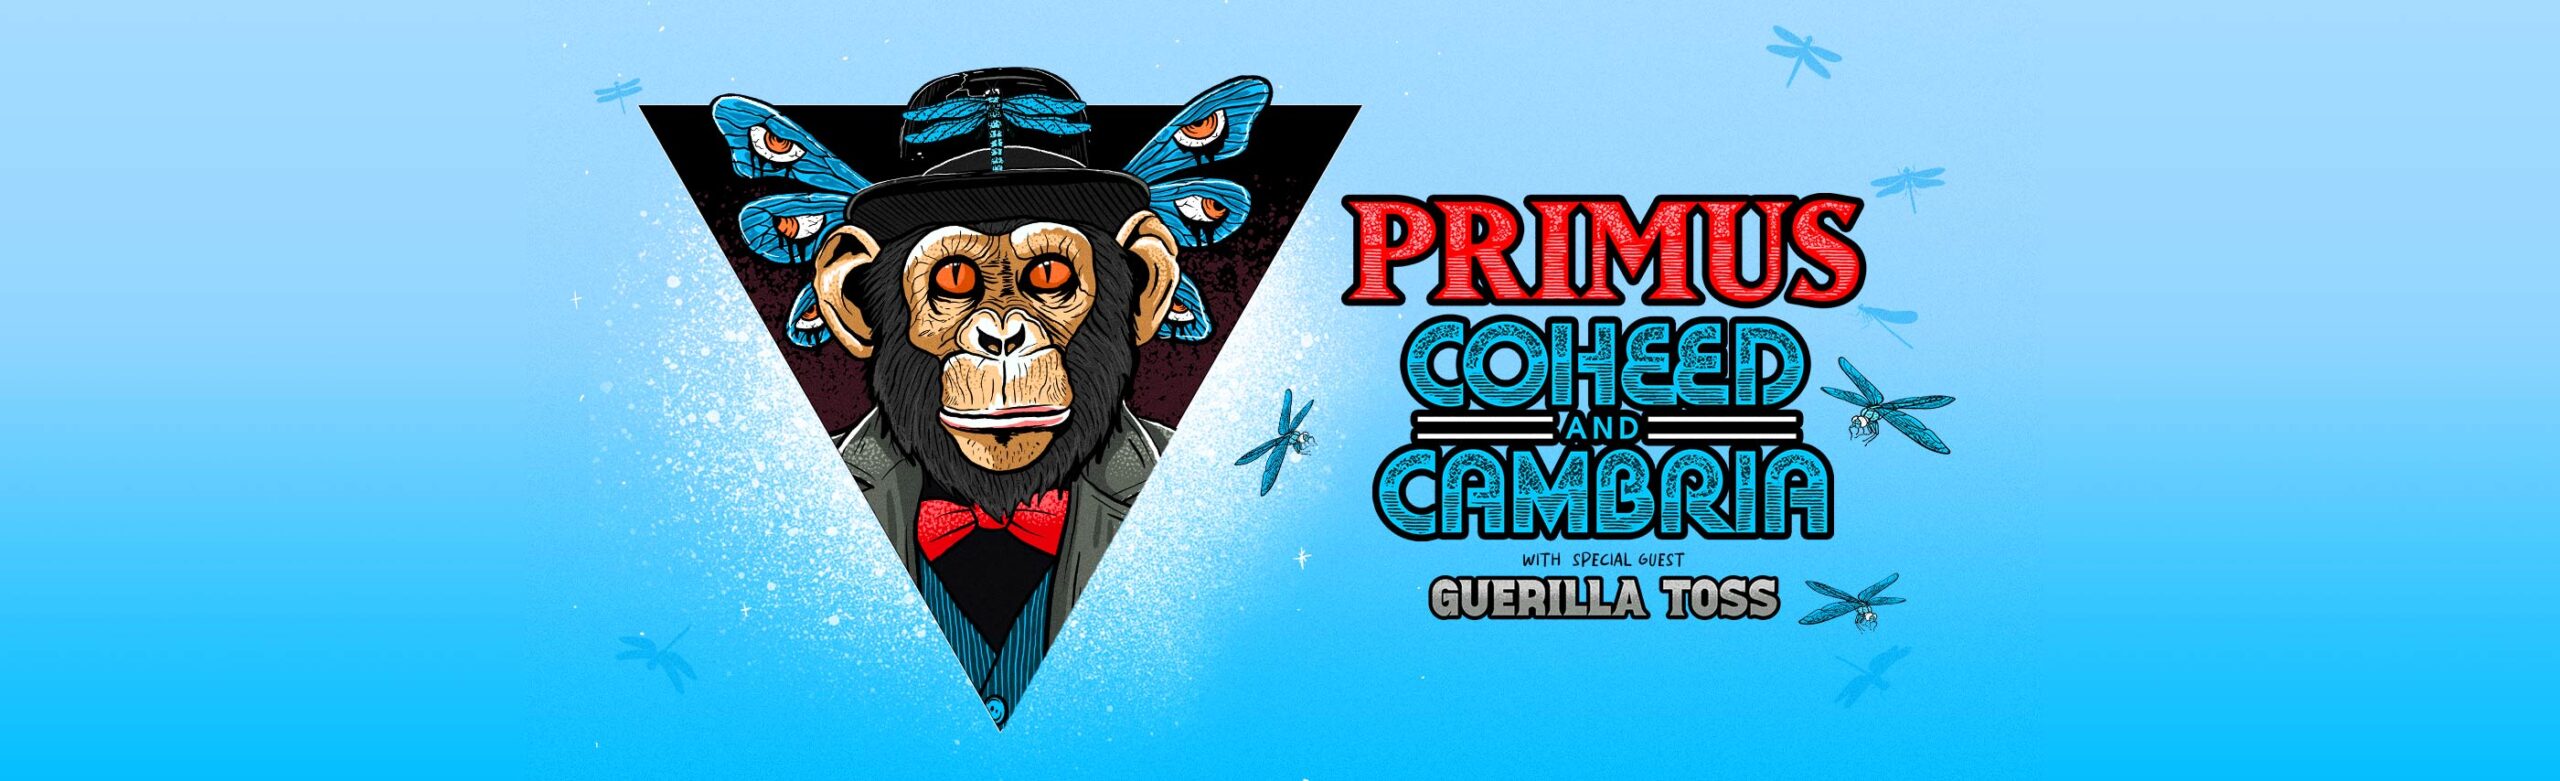 PRIMUS & COHEED AND CAMBRIA Announce Concert at KettleHouse Amphitheater with Guerilla Toss Image